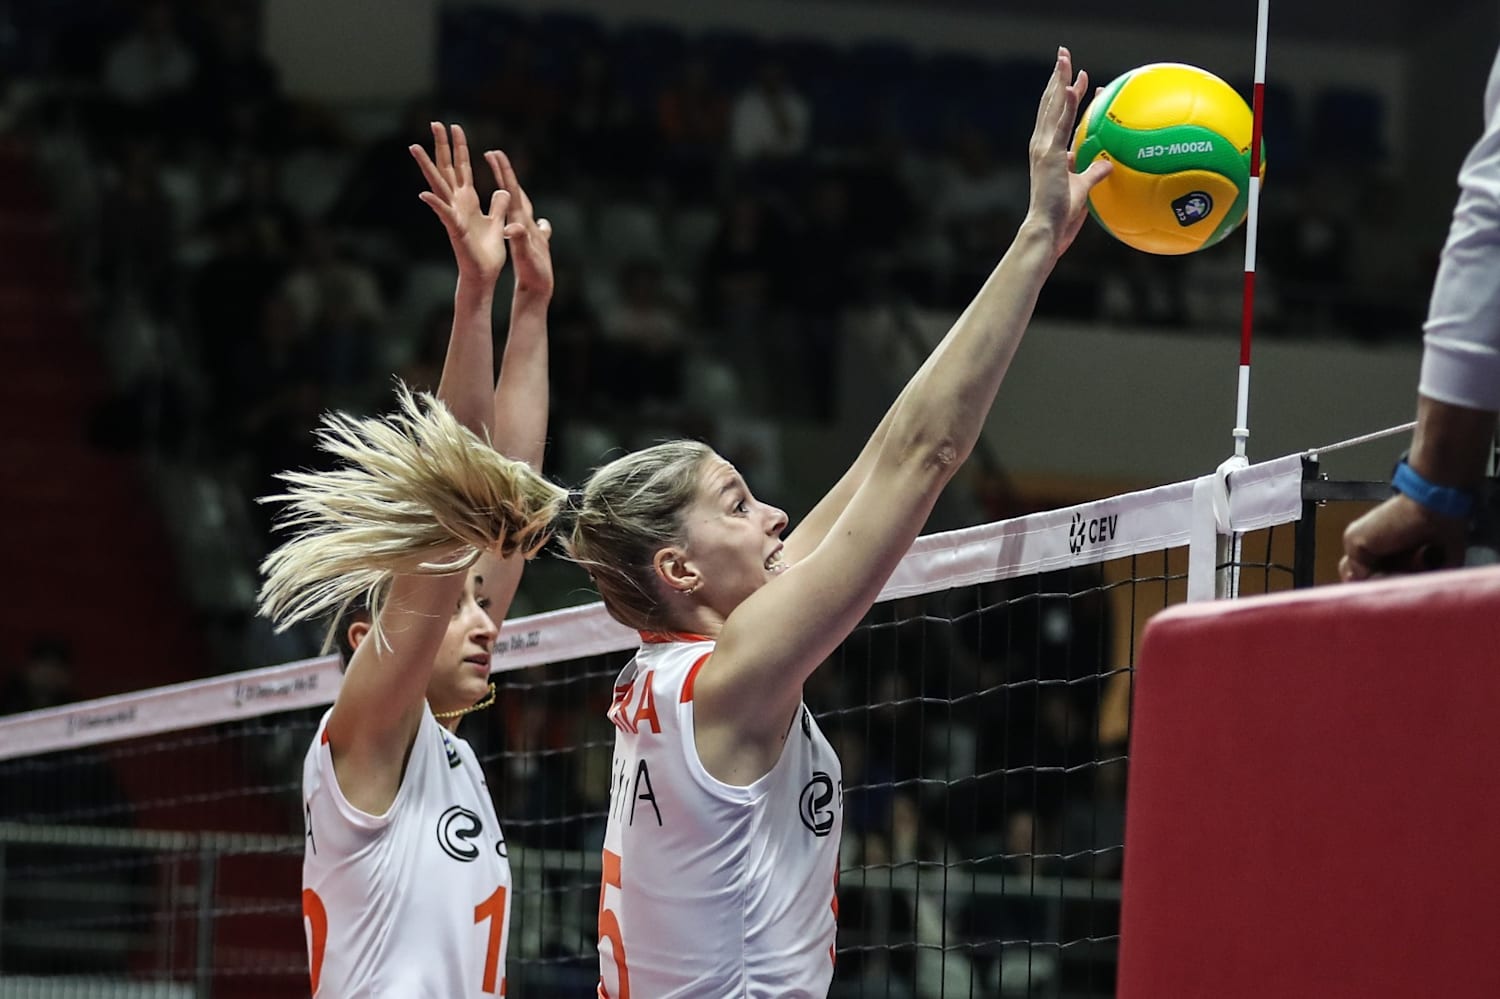 champions league volleyball live stream